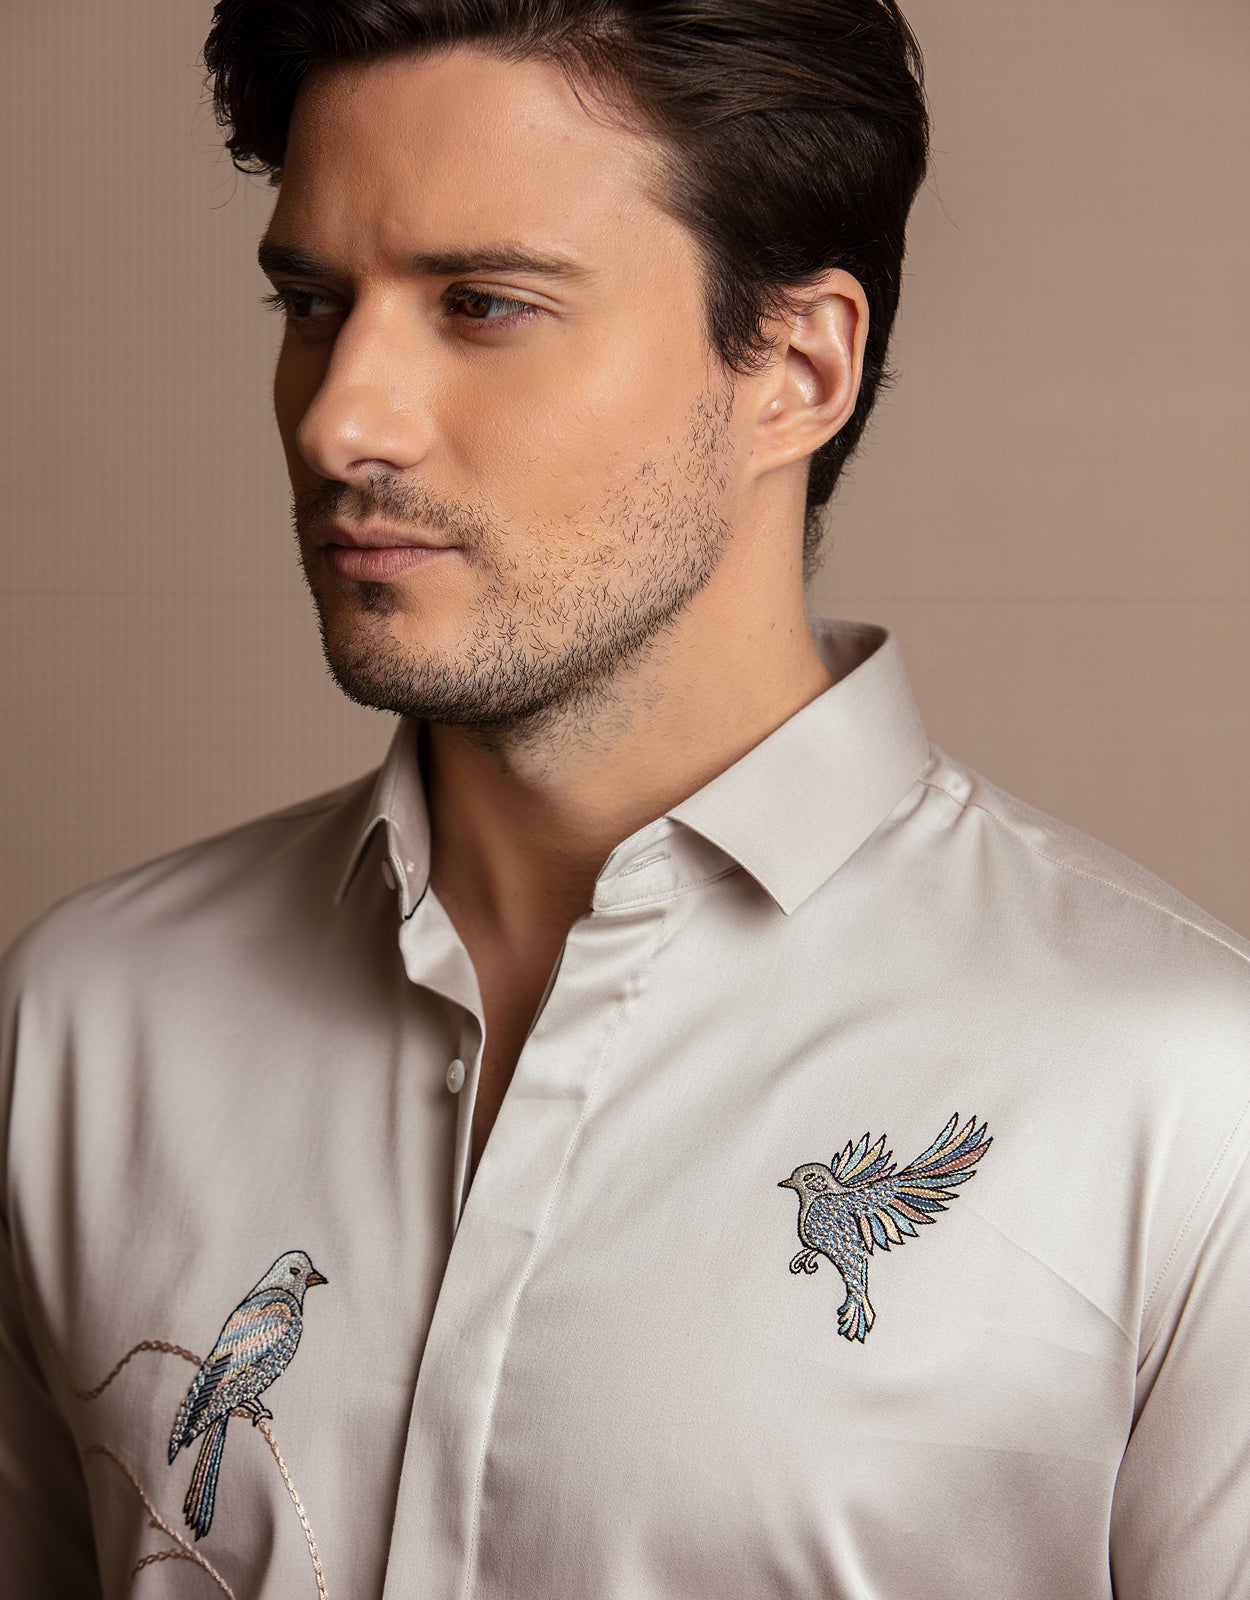 FAMILY OF BIRDS EMBROIDERED SHIRT